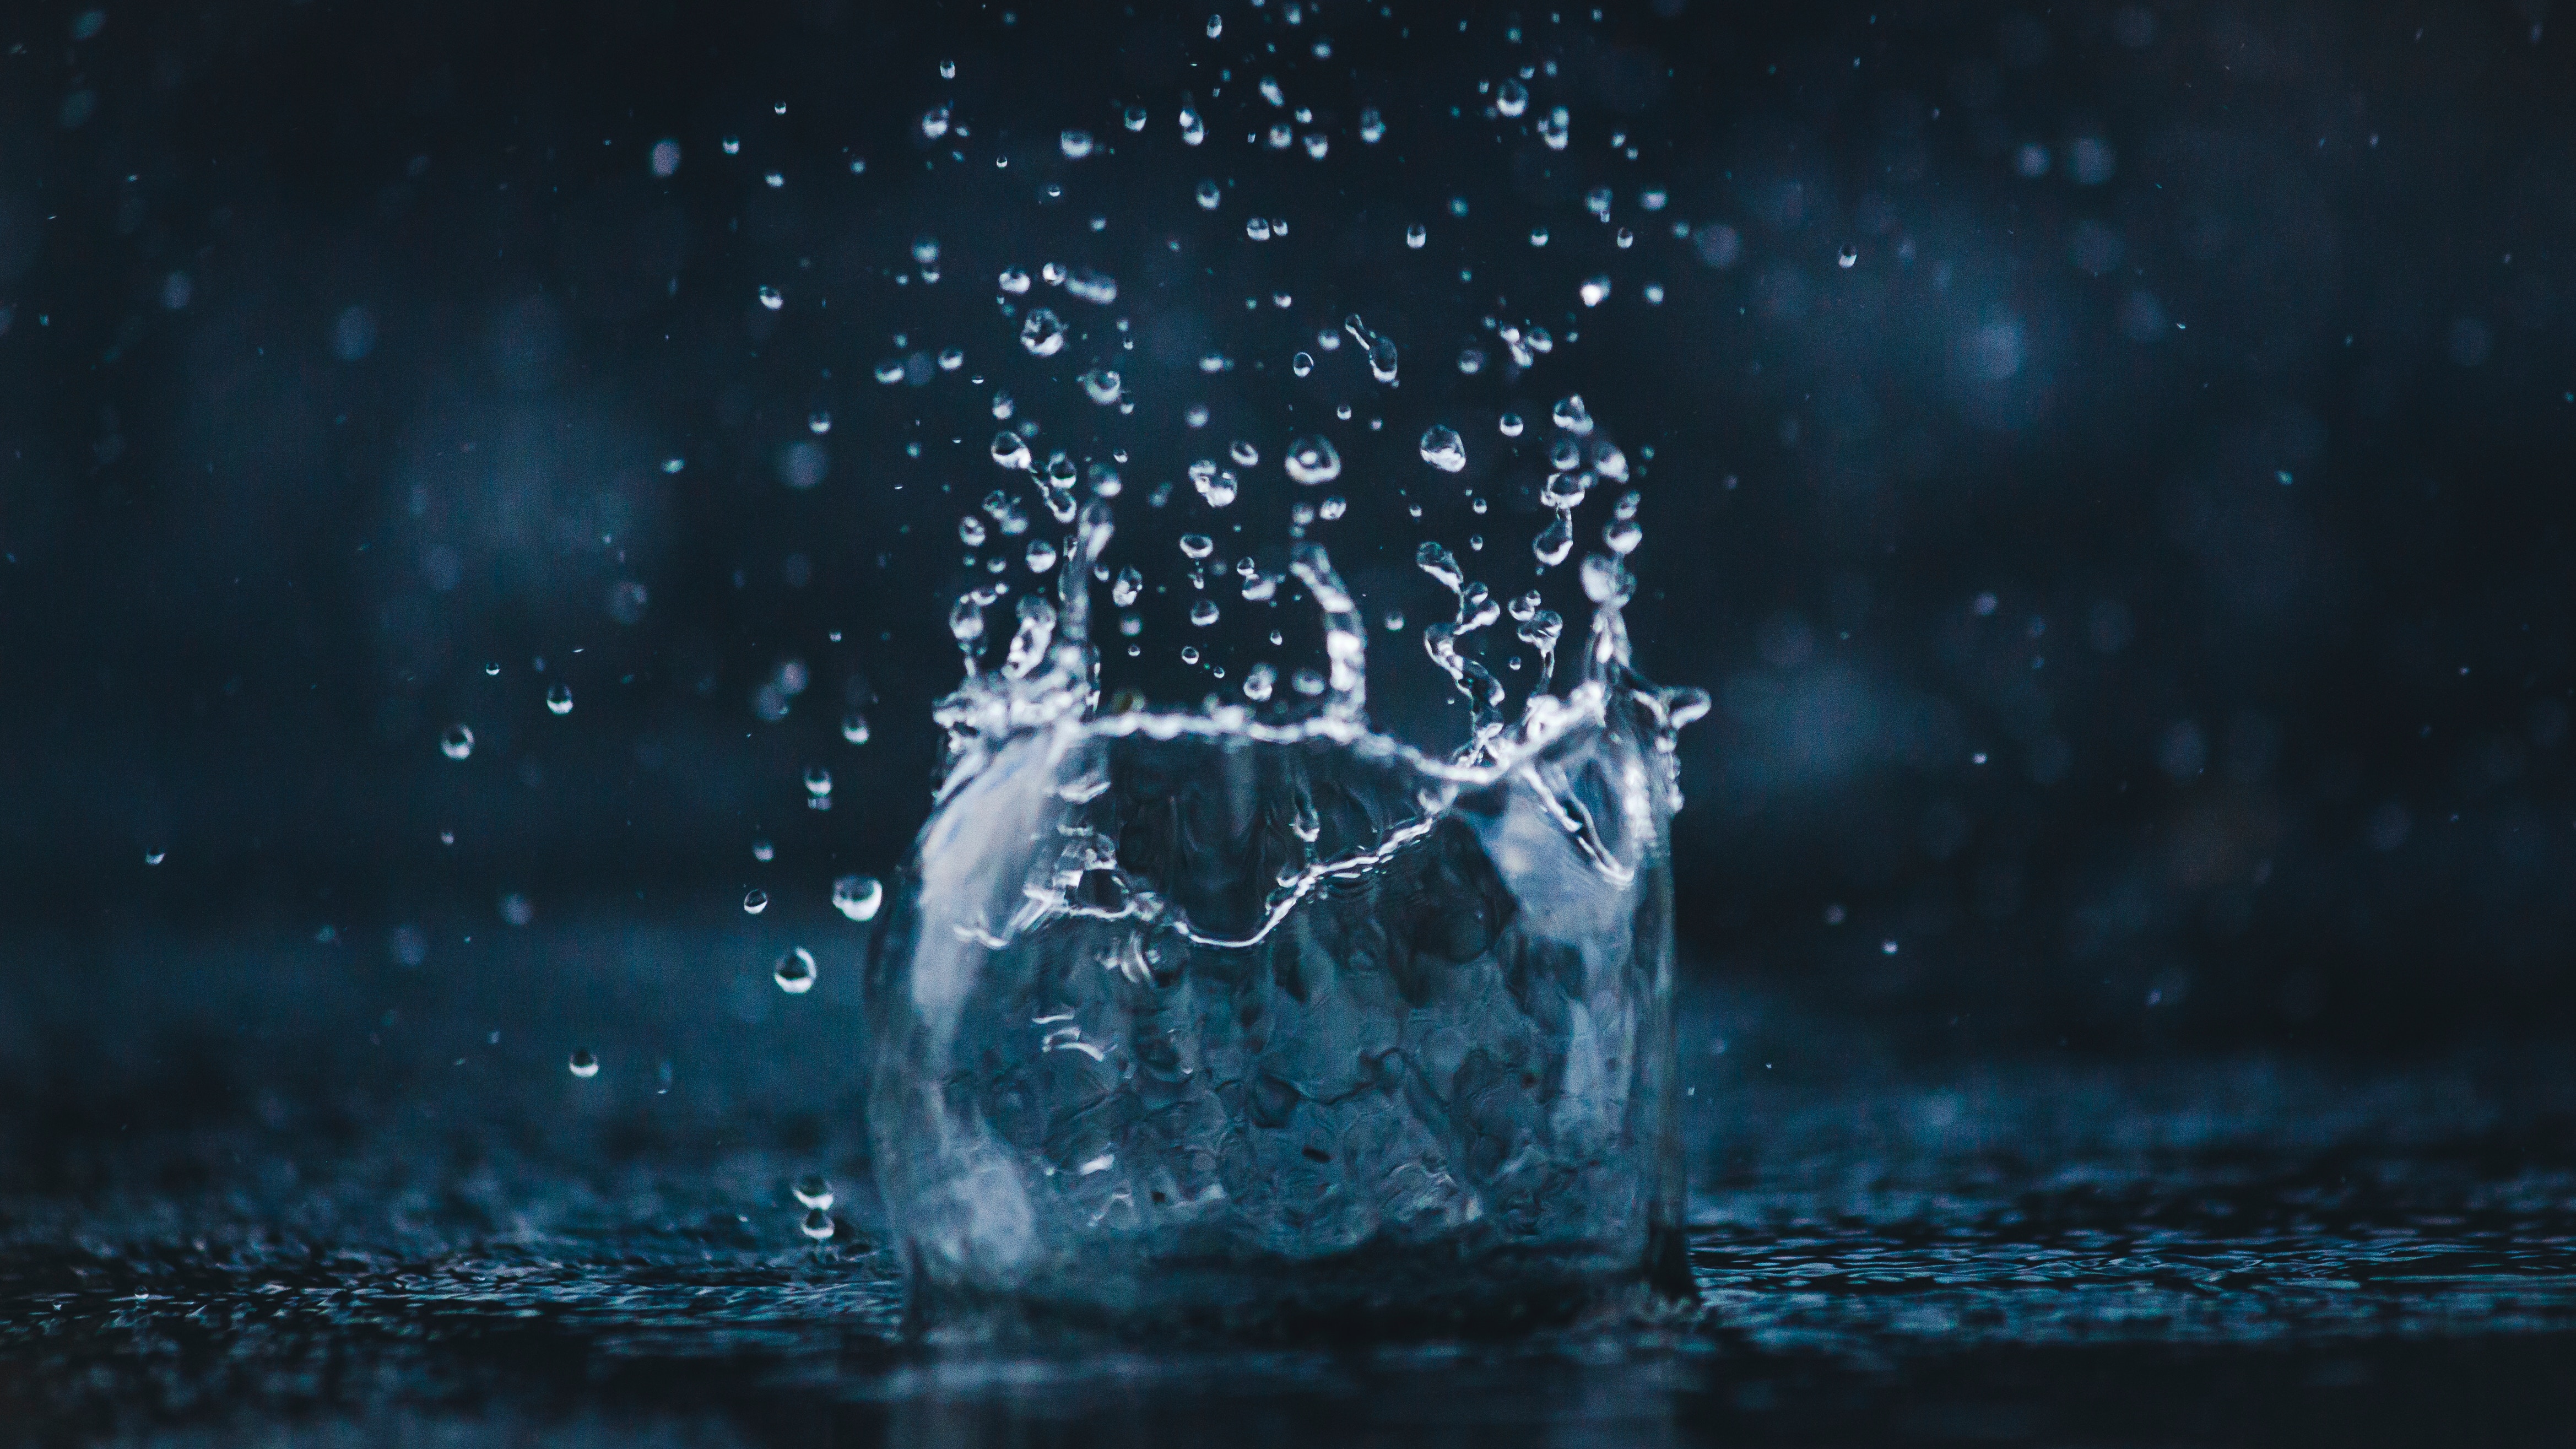 Photo of droplet about to hit water